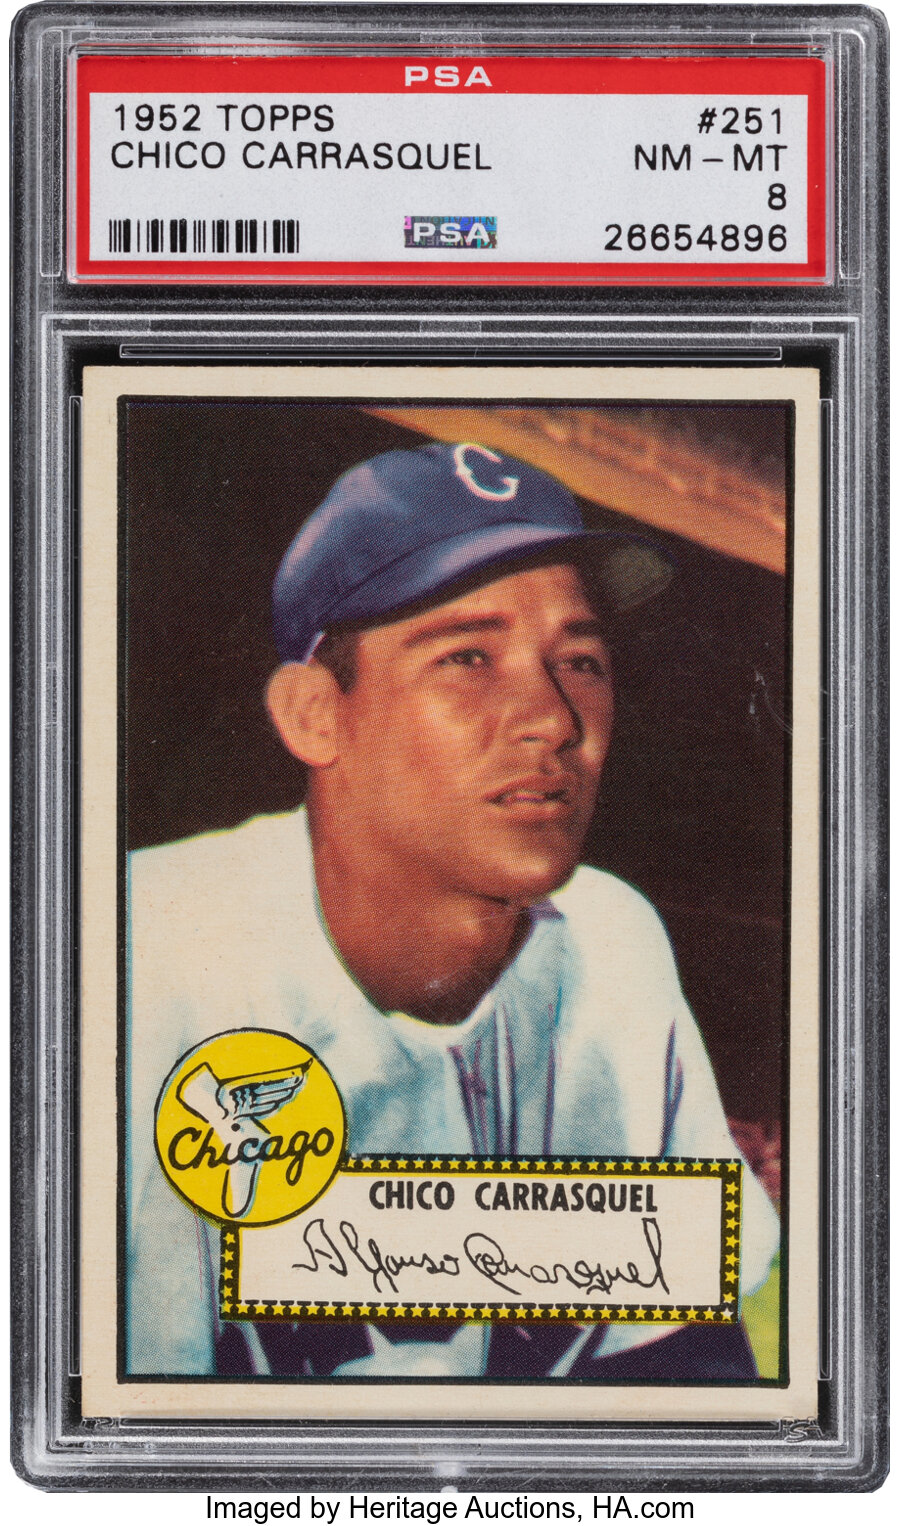 1952 Topps Chico Carrasquel #251 PSA NM-MT 8 - Three Higher